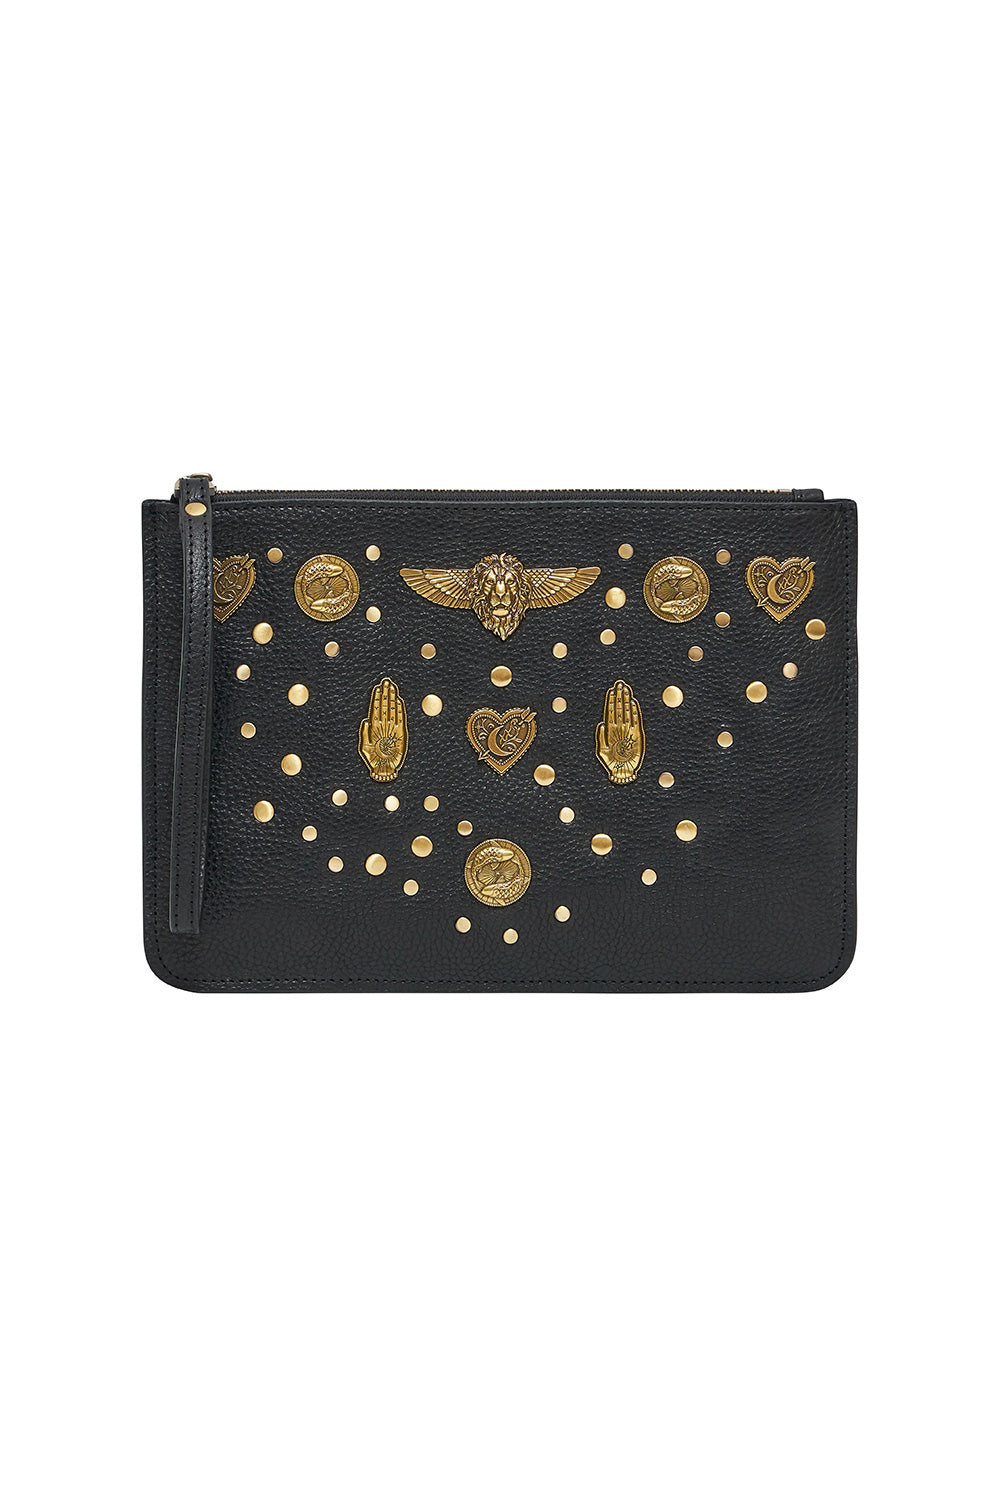 STUDDED LEATHER CLUTCH SOLID BLACK